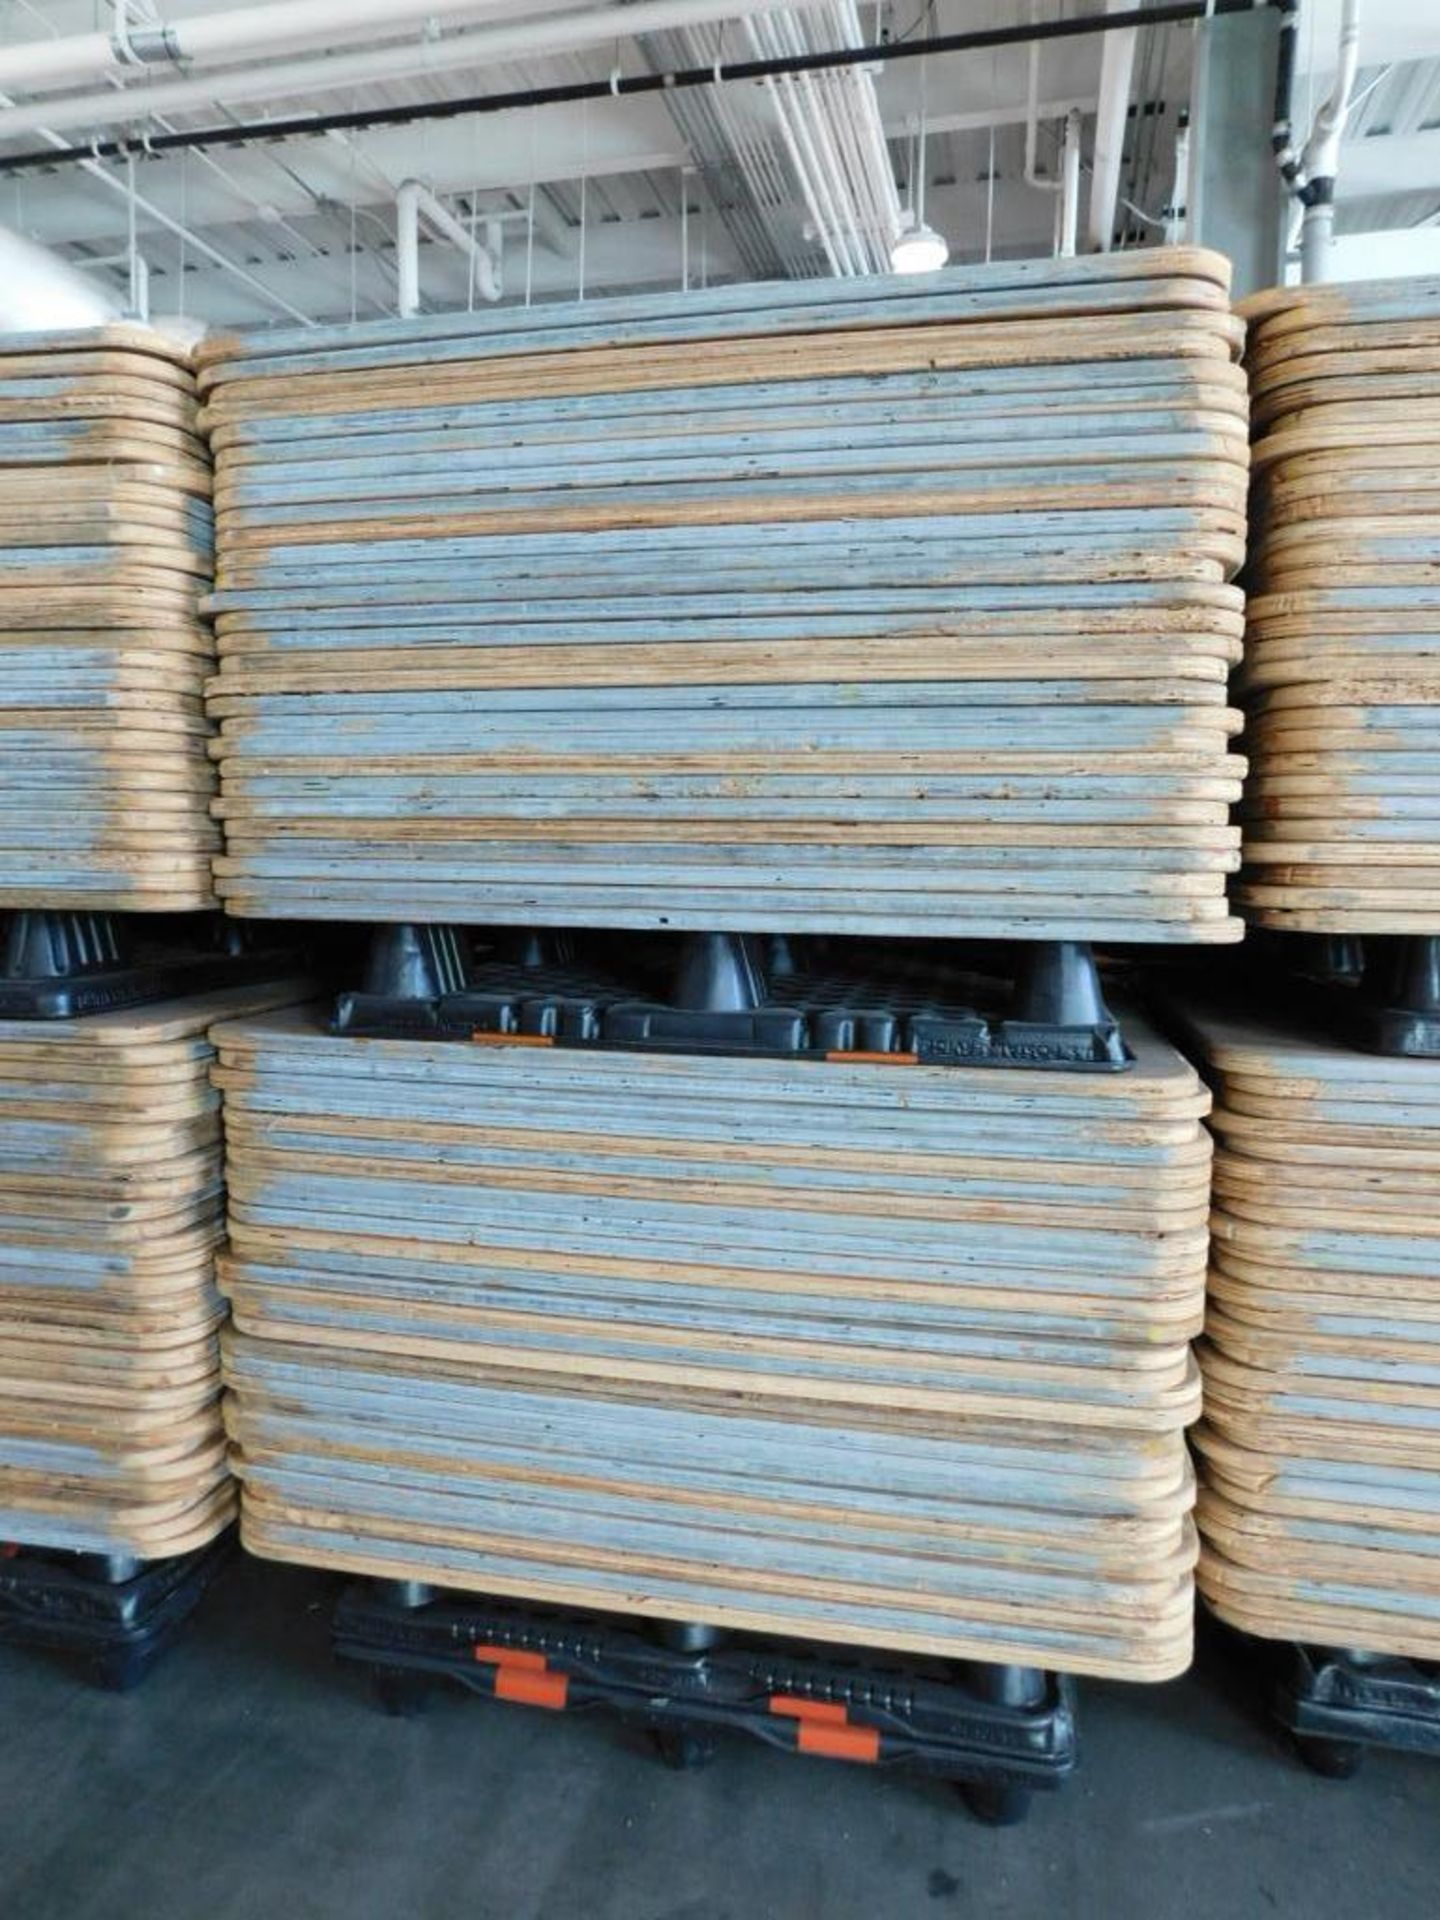 LOT: Large Quantity of 50" x 50" Wood Paper Roll Pallets on (12) Plastic Pallets (LOCATION: IN MAIL - Image 4 of 8